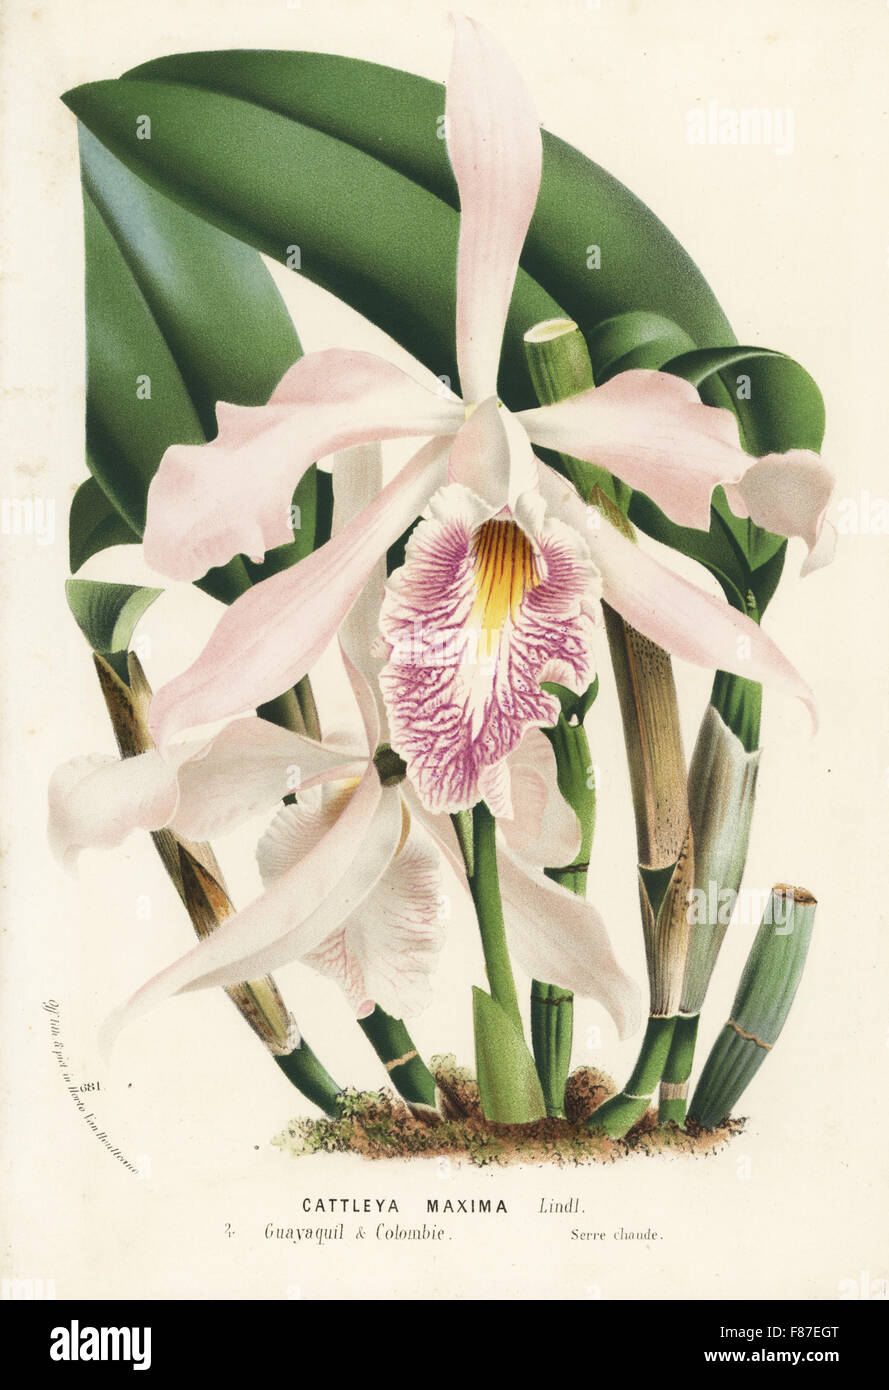 Largest cattleya orchid or peekaboo orchid, Cattleya maxima. Handcoloured lithograph from Louis van Houtte and Charles Lemaire's Flowers of the Gardens and Hothouses of Europe, Flore des Serres et des Jardins de l'Europe, Ghent, Belgium, 1874. Stock Photo